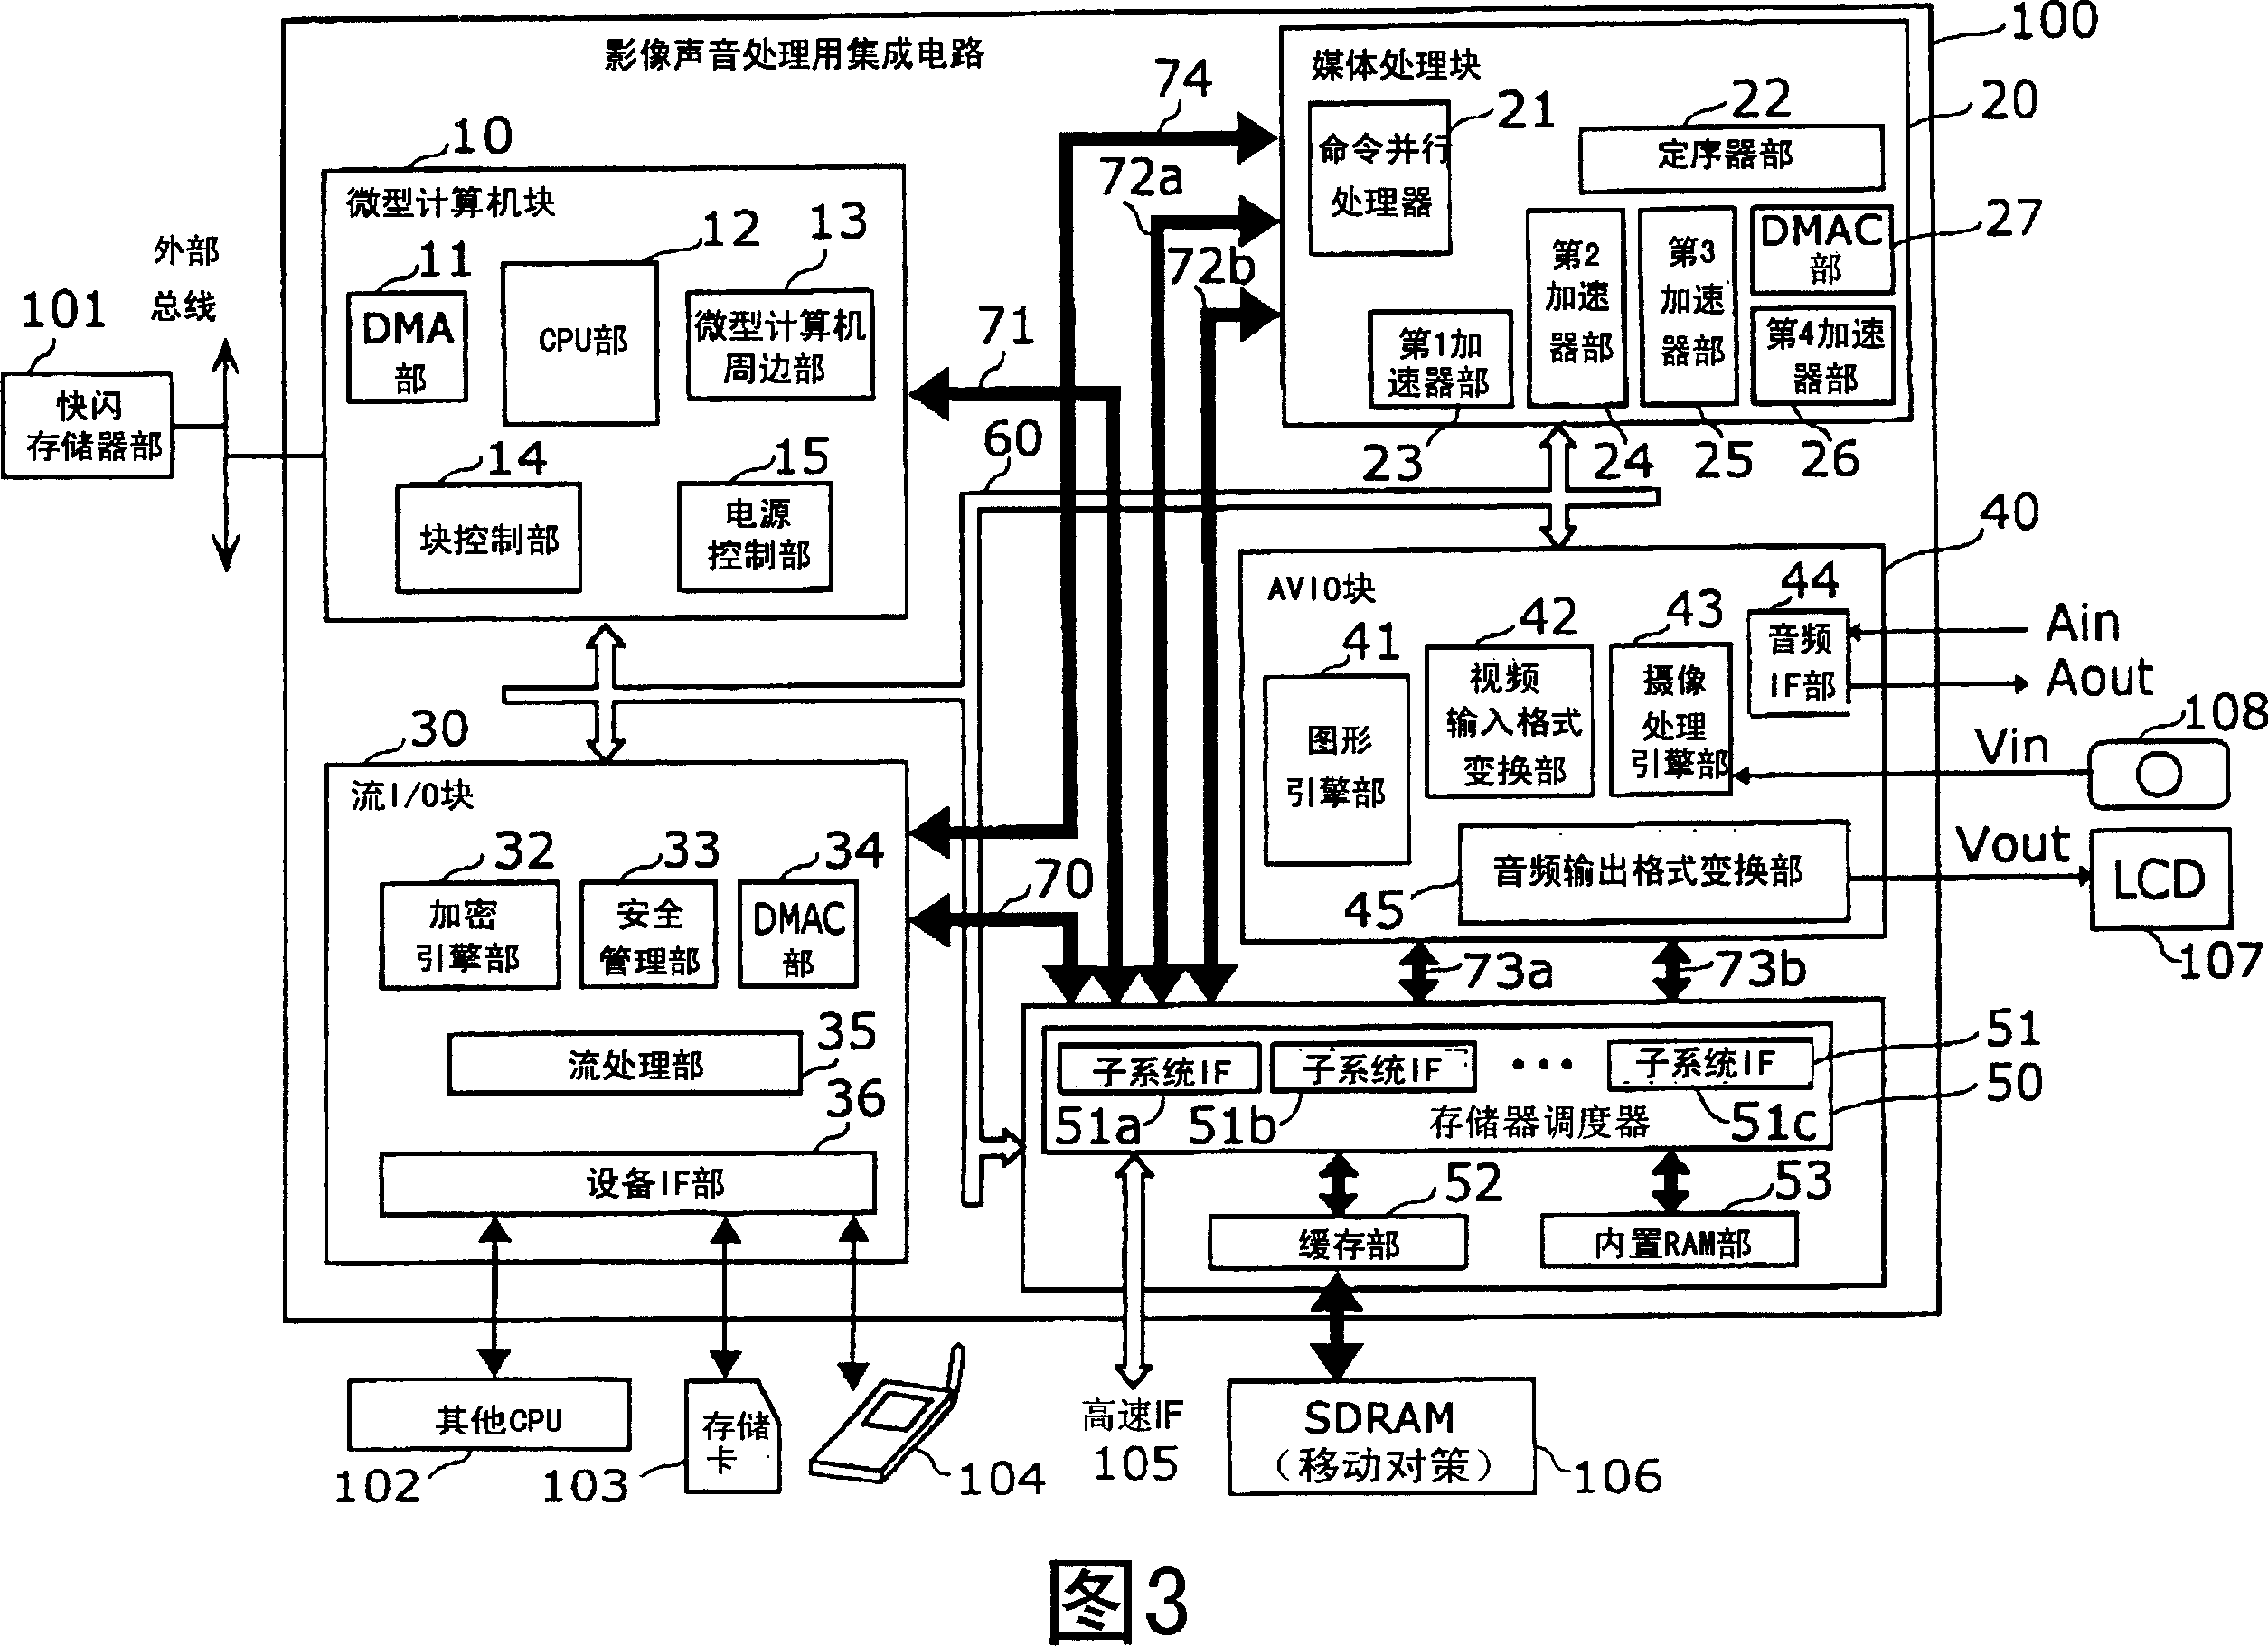 Integrated circuit for video/audio processing